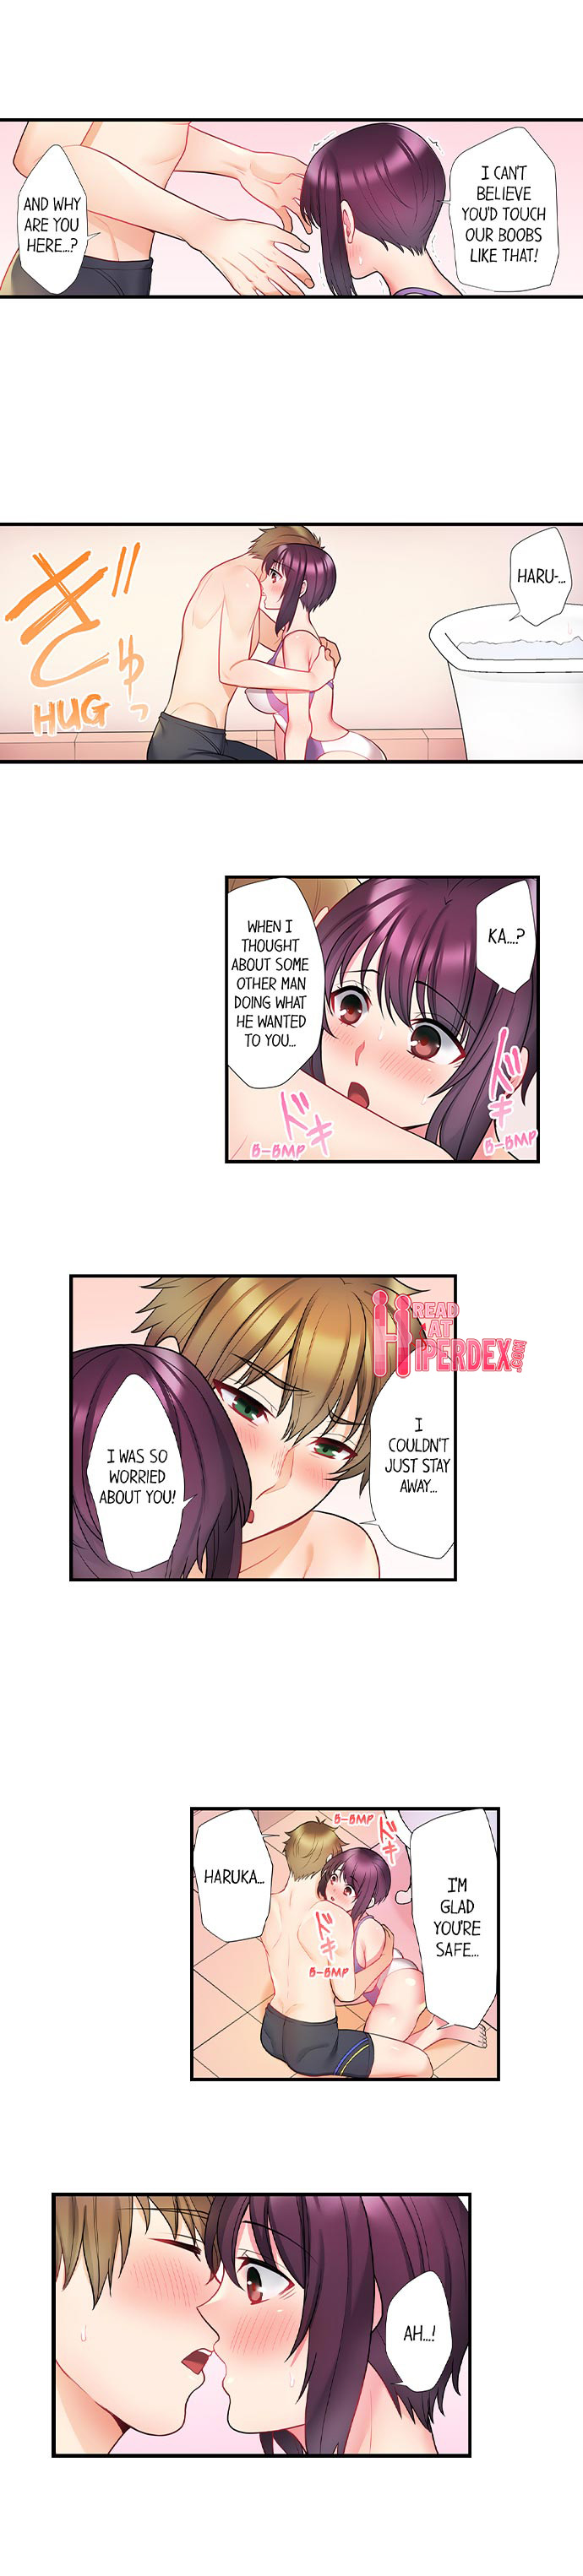 Bike Delivery Girl, Cumming To Your Door! - Chapter 11 Page 8